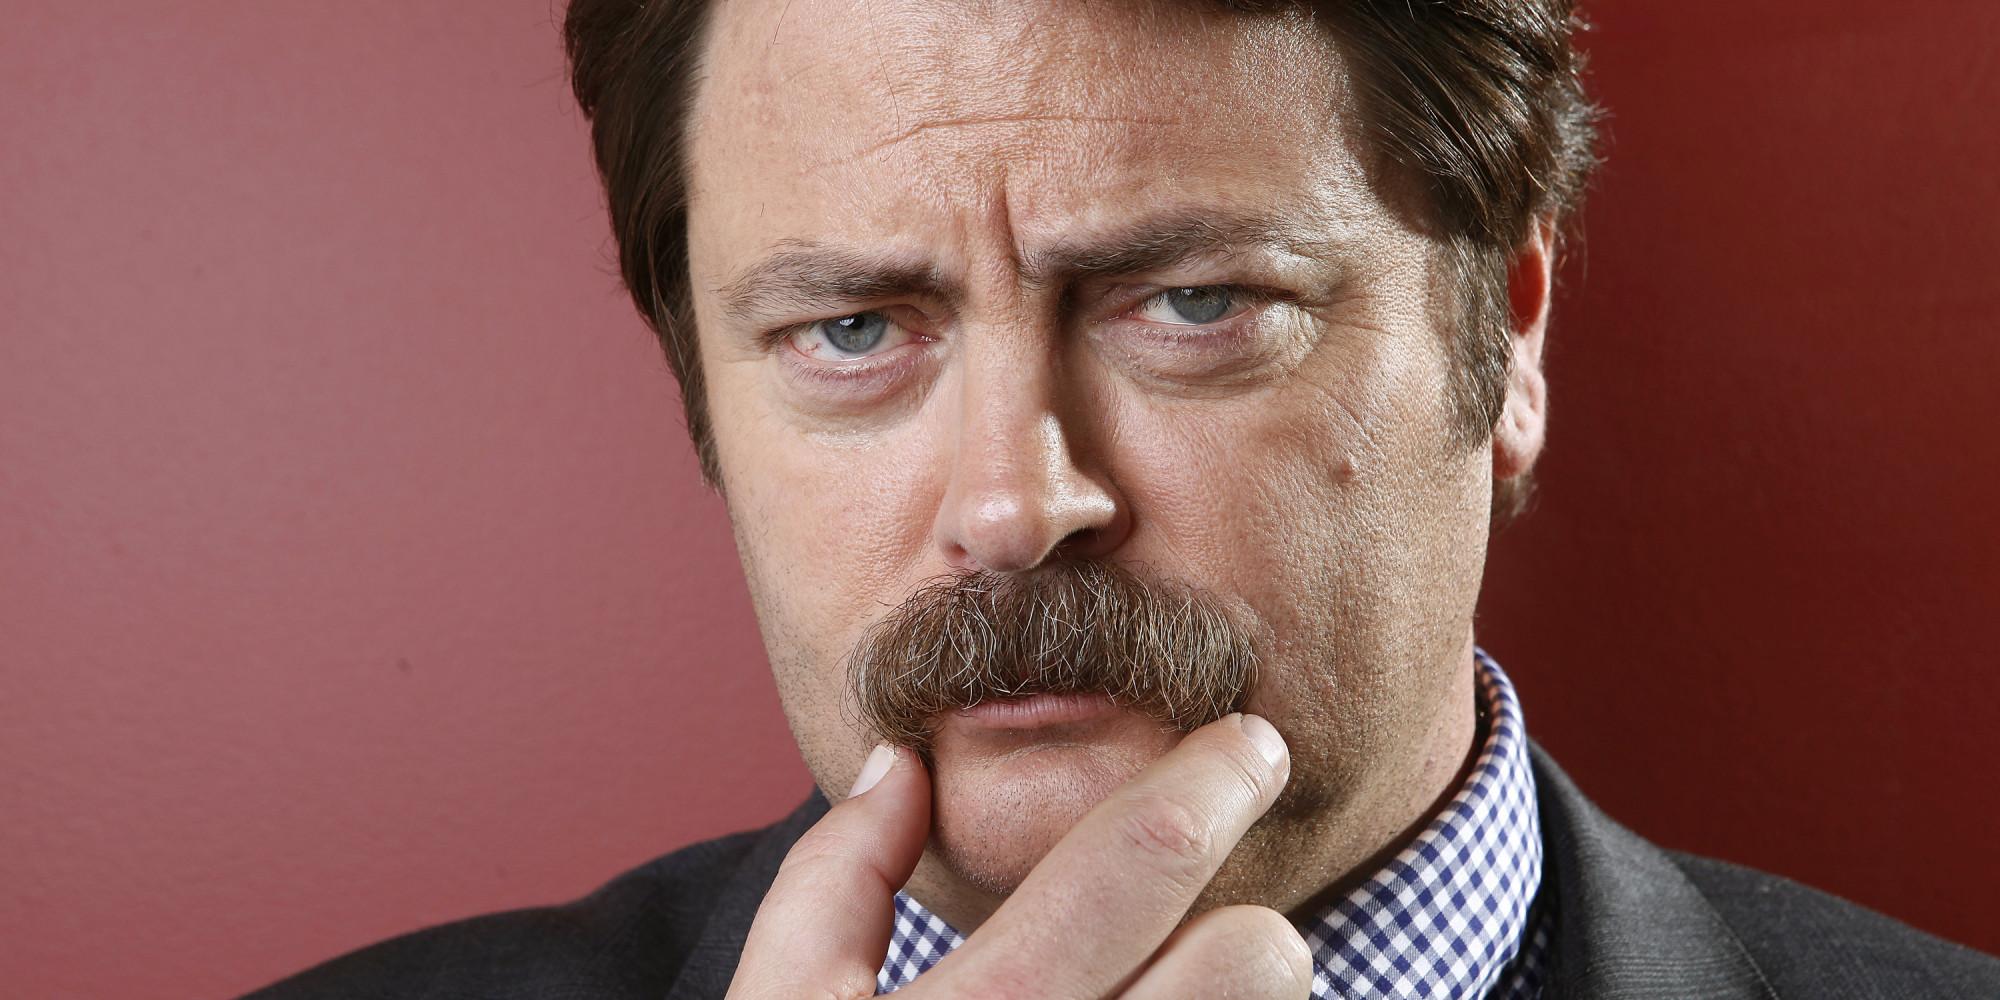 Ron Swanson: Nick Offerman reveals what his Parks and Recreation